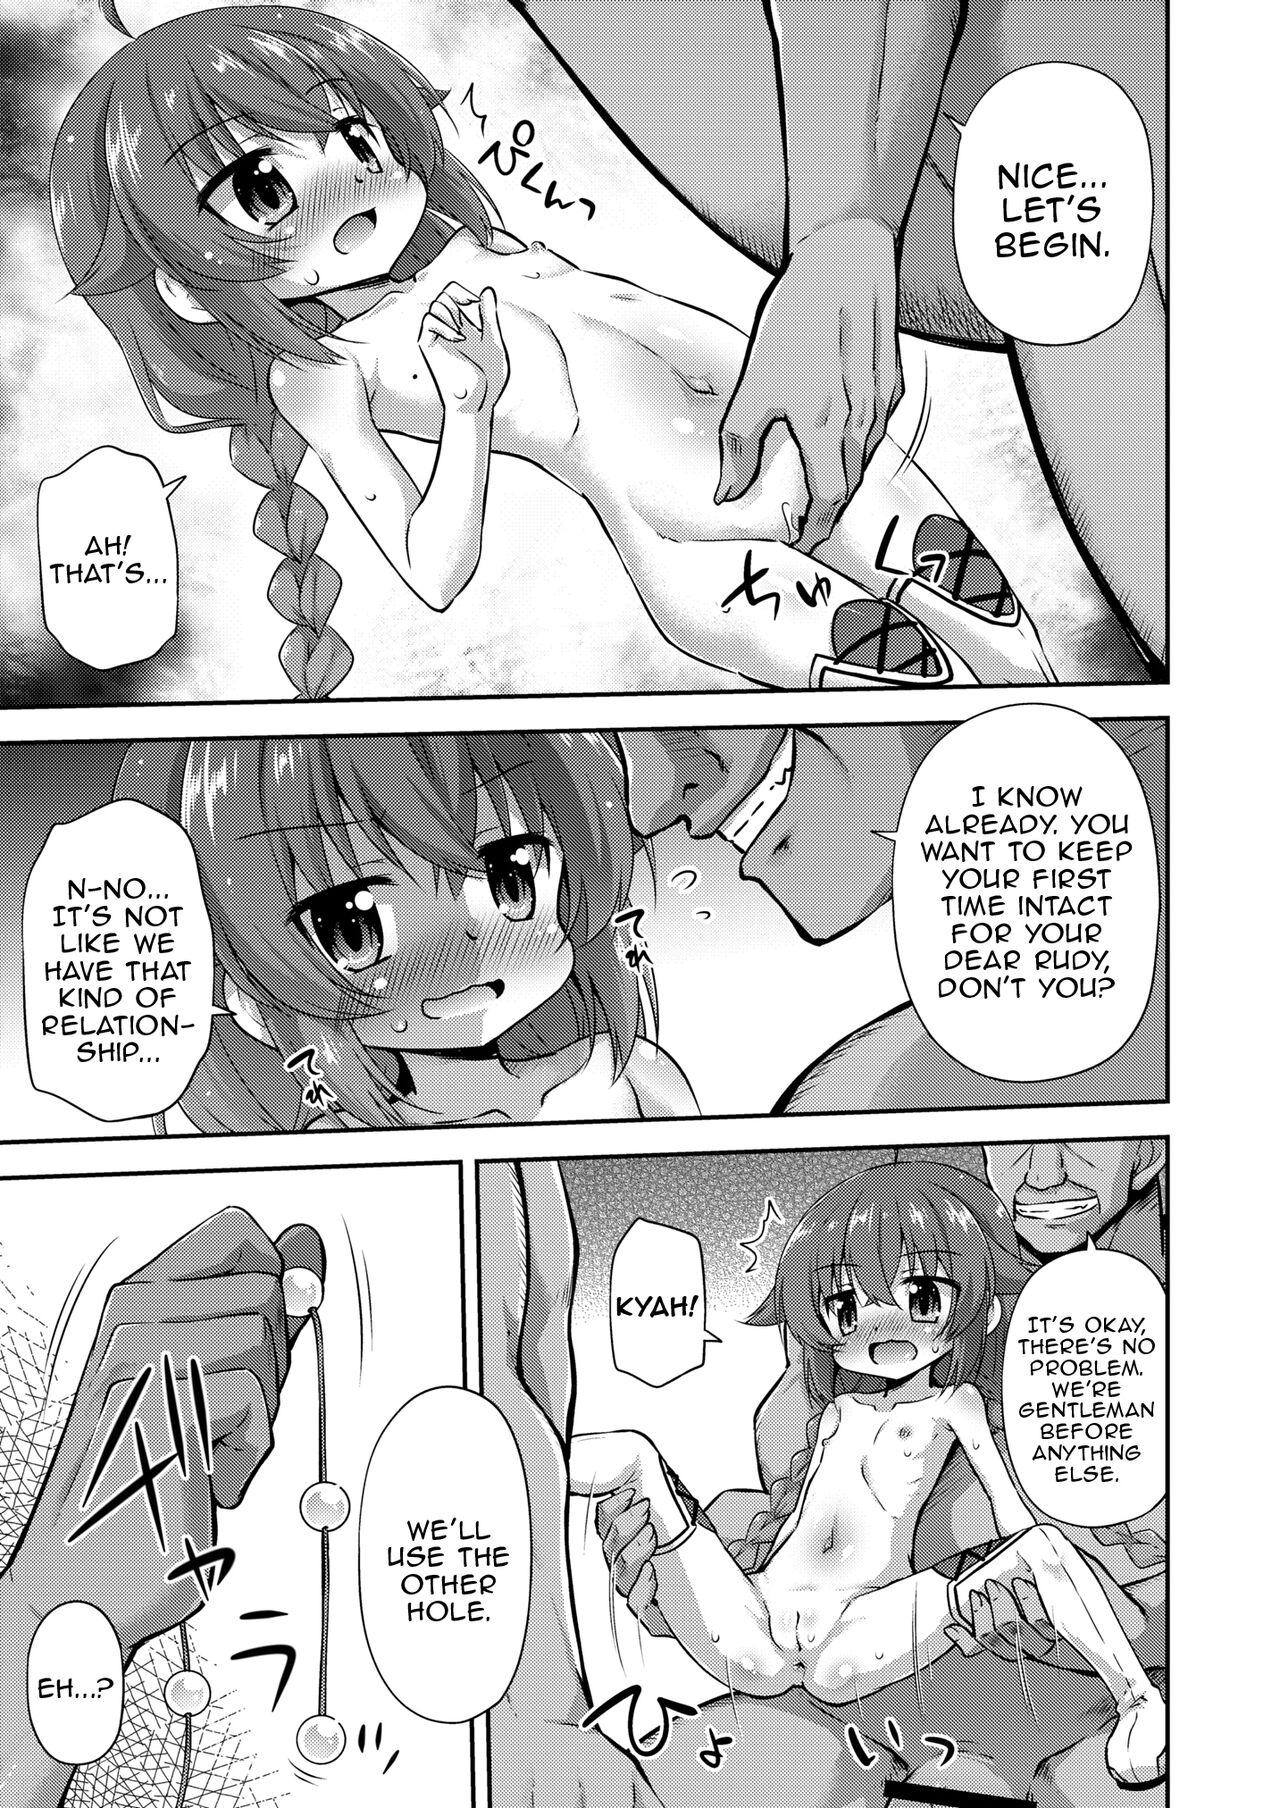 Orgasms The Information Fee is My Body! - Mushoku tensei Fodendo - Page 6